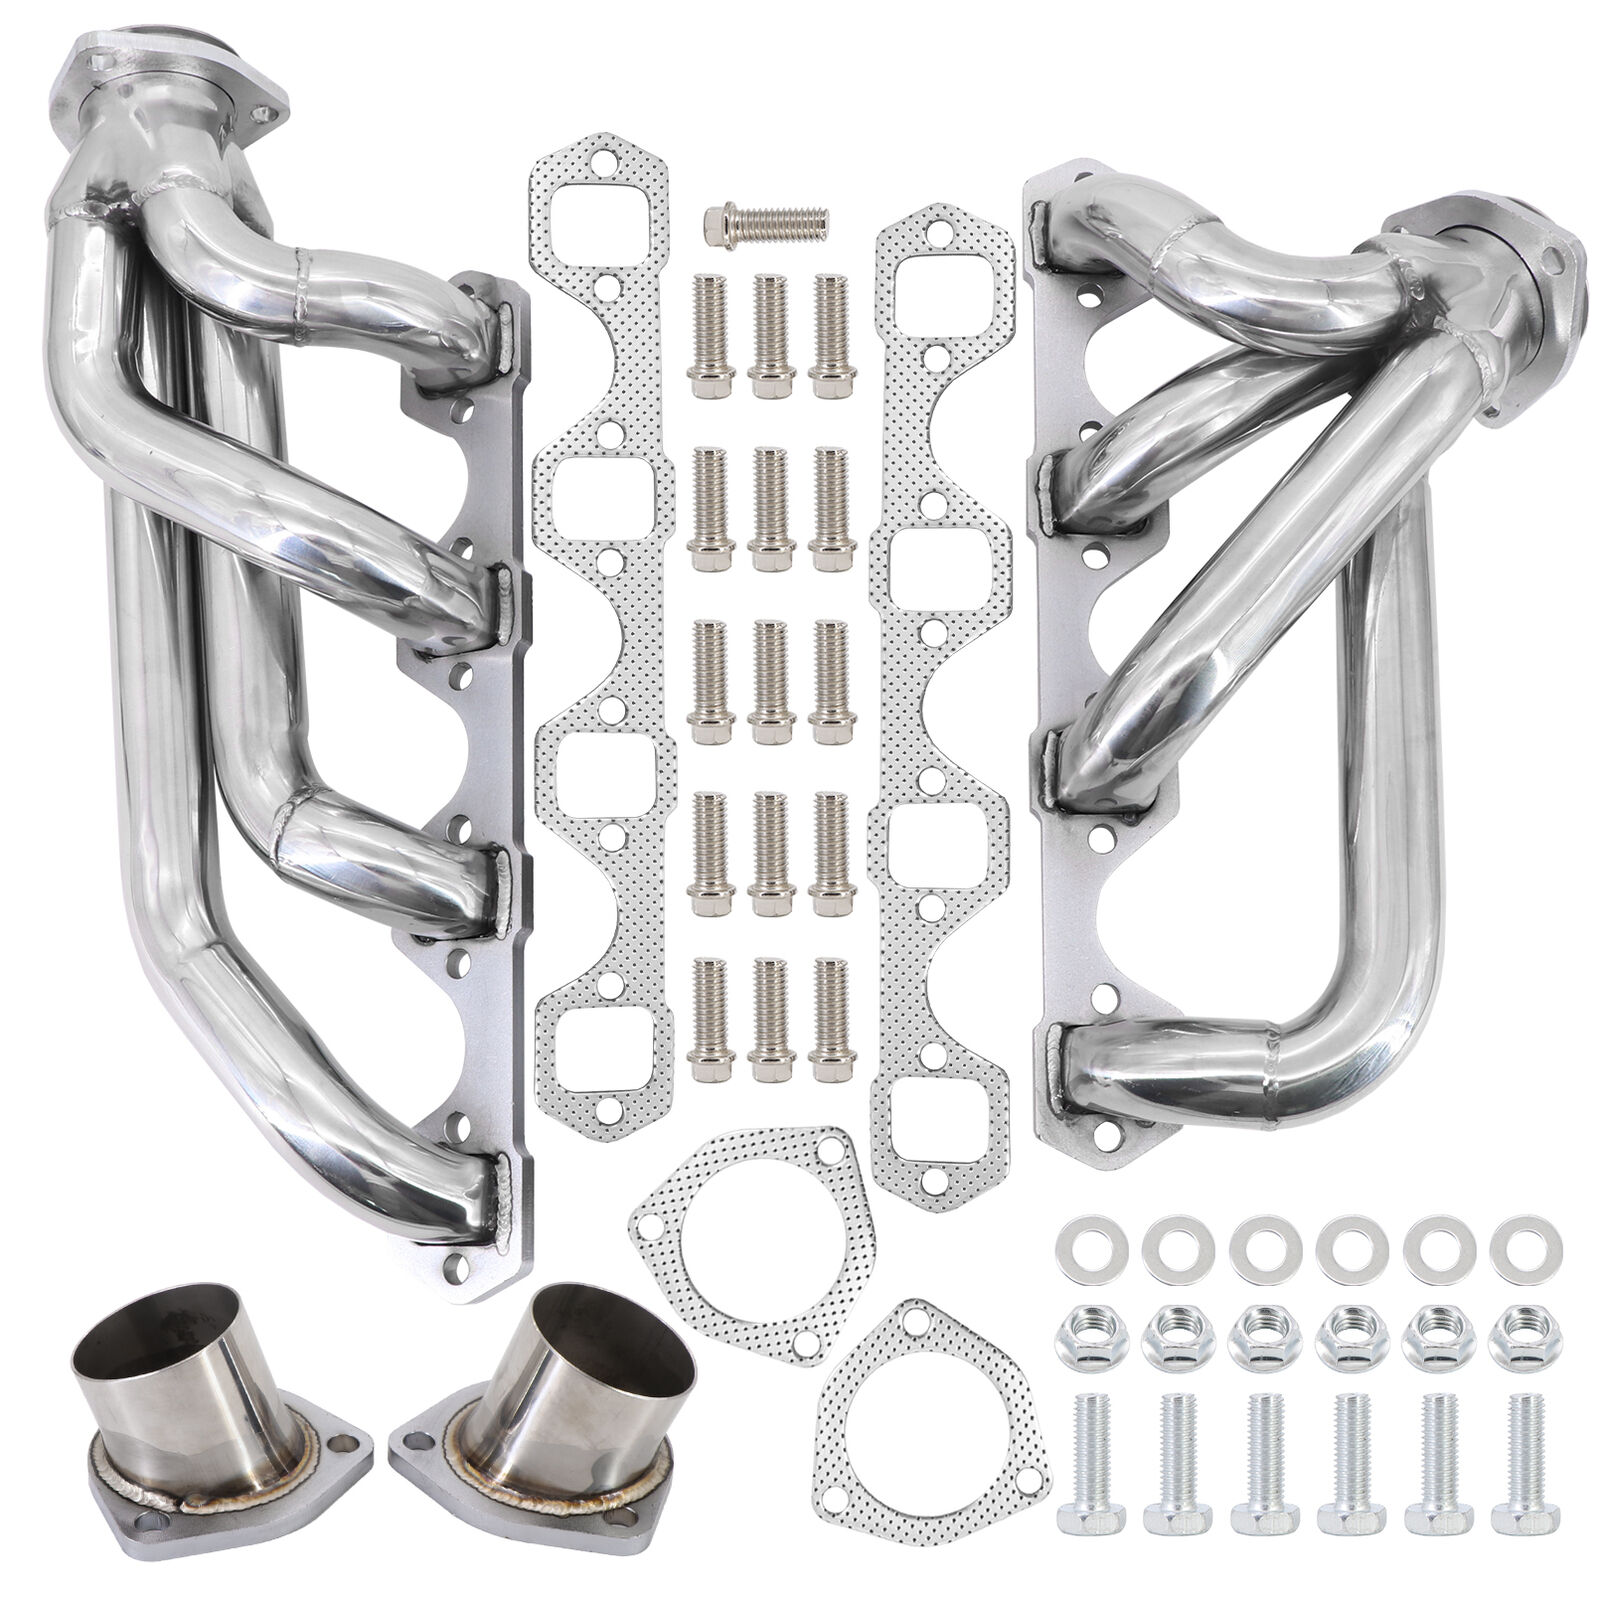 Stainless Steel Exhaust Header Manifold For 63-77 Ford Mustang/Cougar 260-302 V8